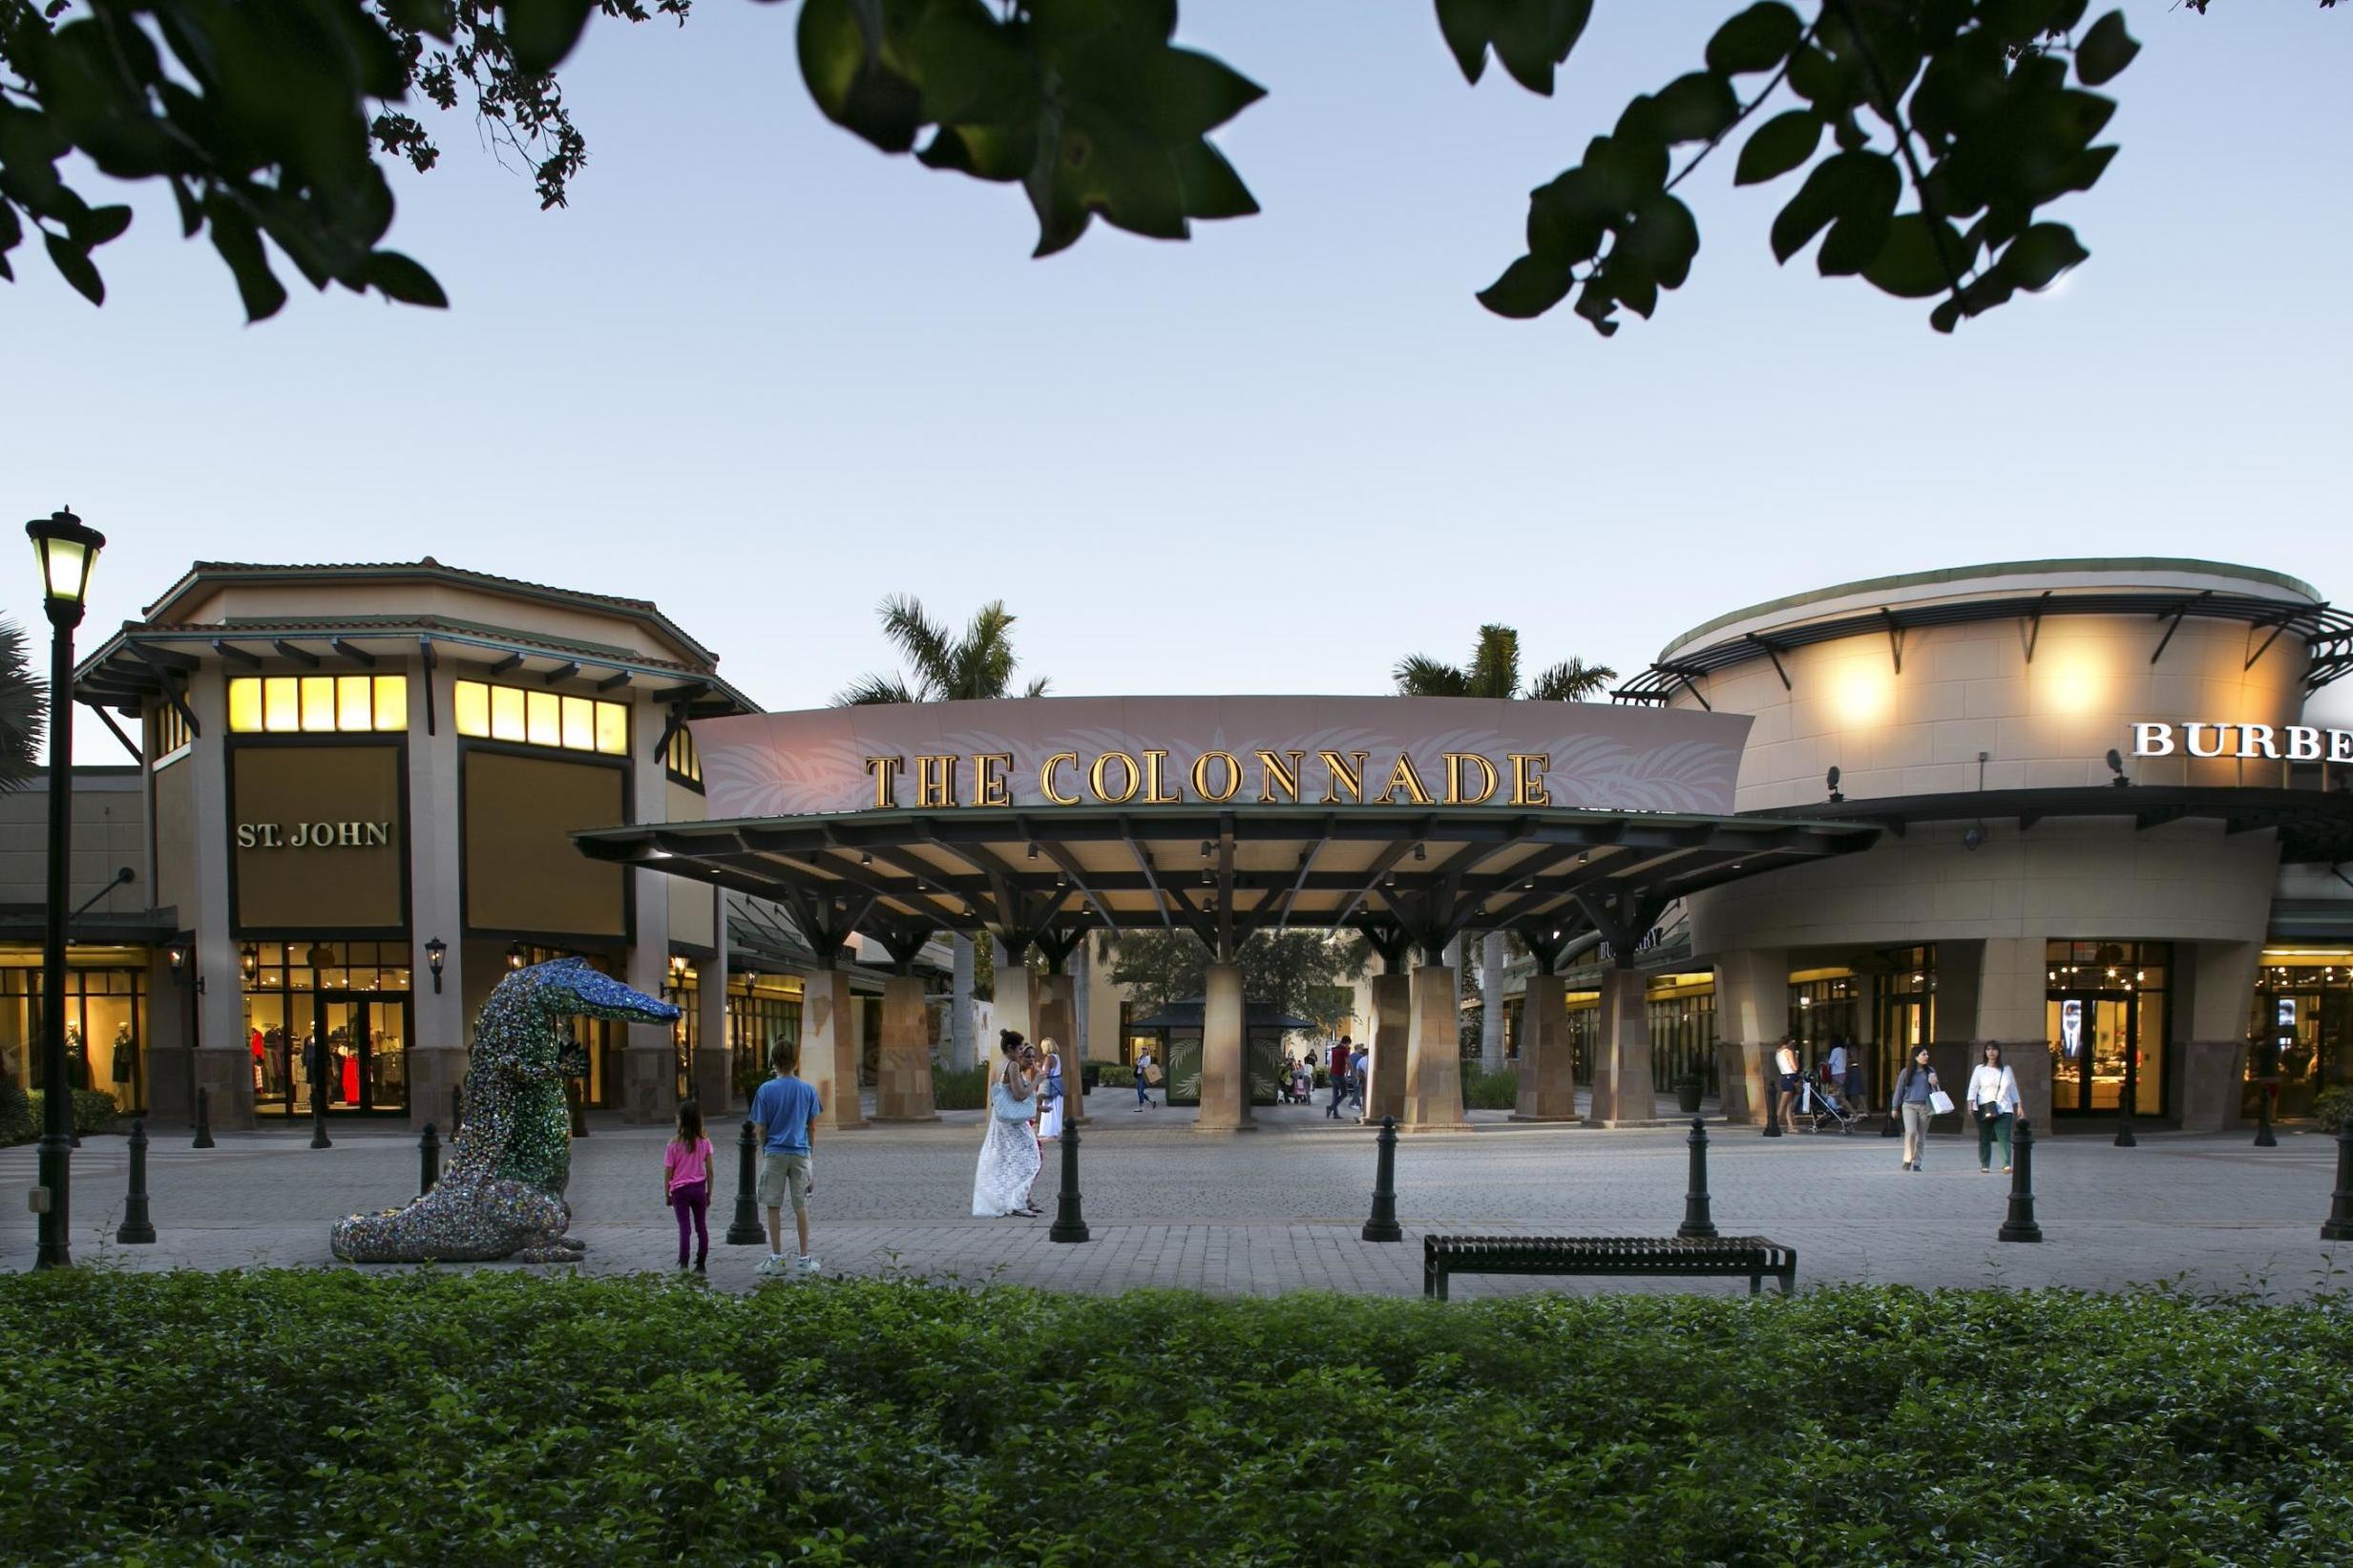 Sawgrass Mills and the Colonnade Outlets has over 350 retailers